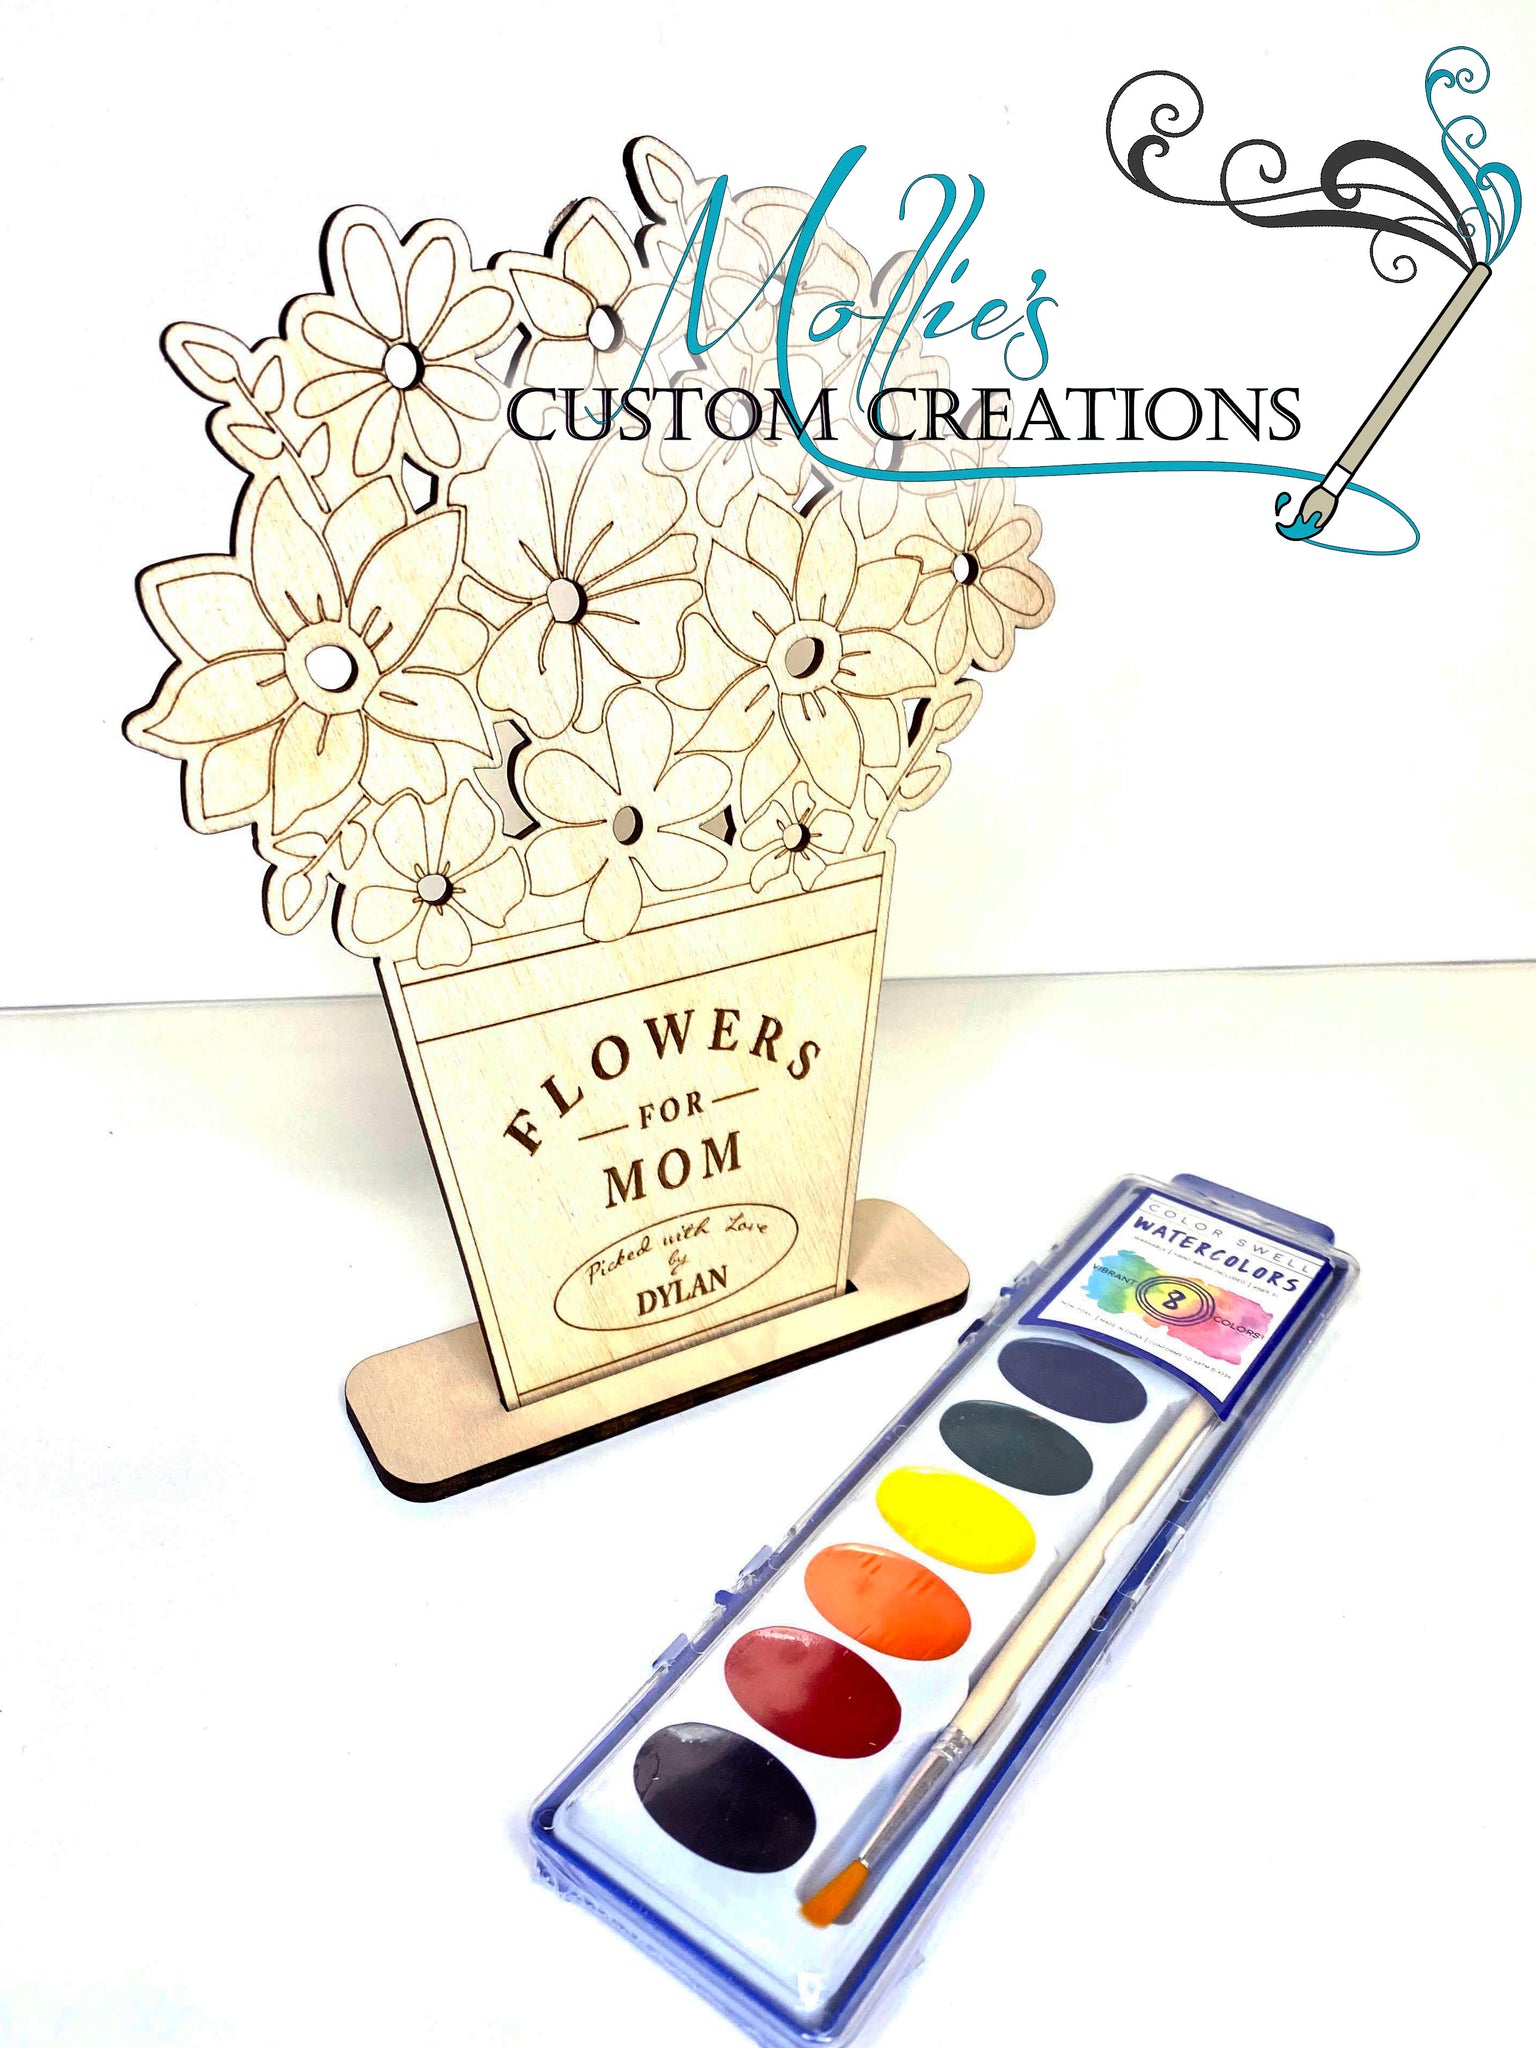 Fall Florals Watercolor Painting Kit